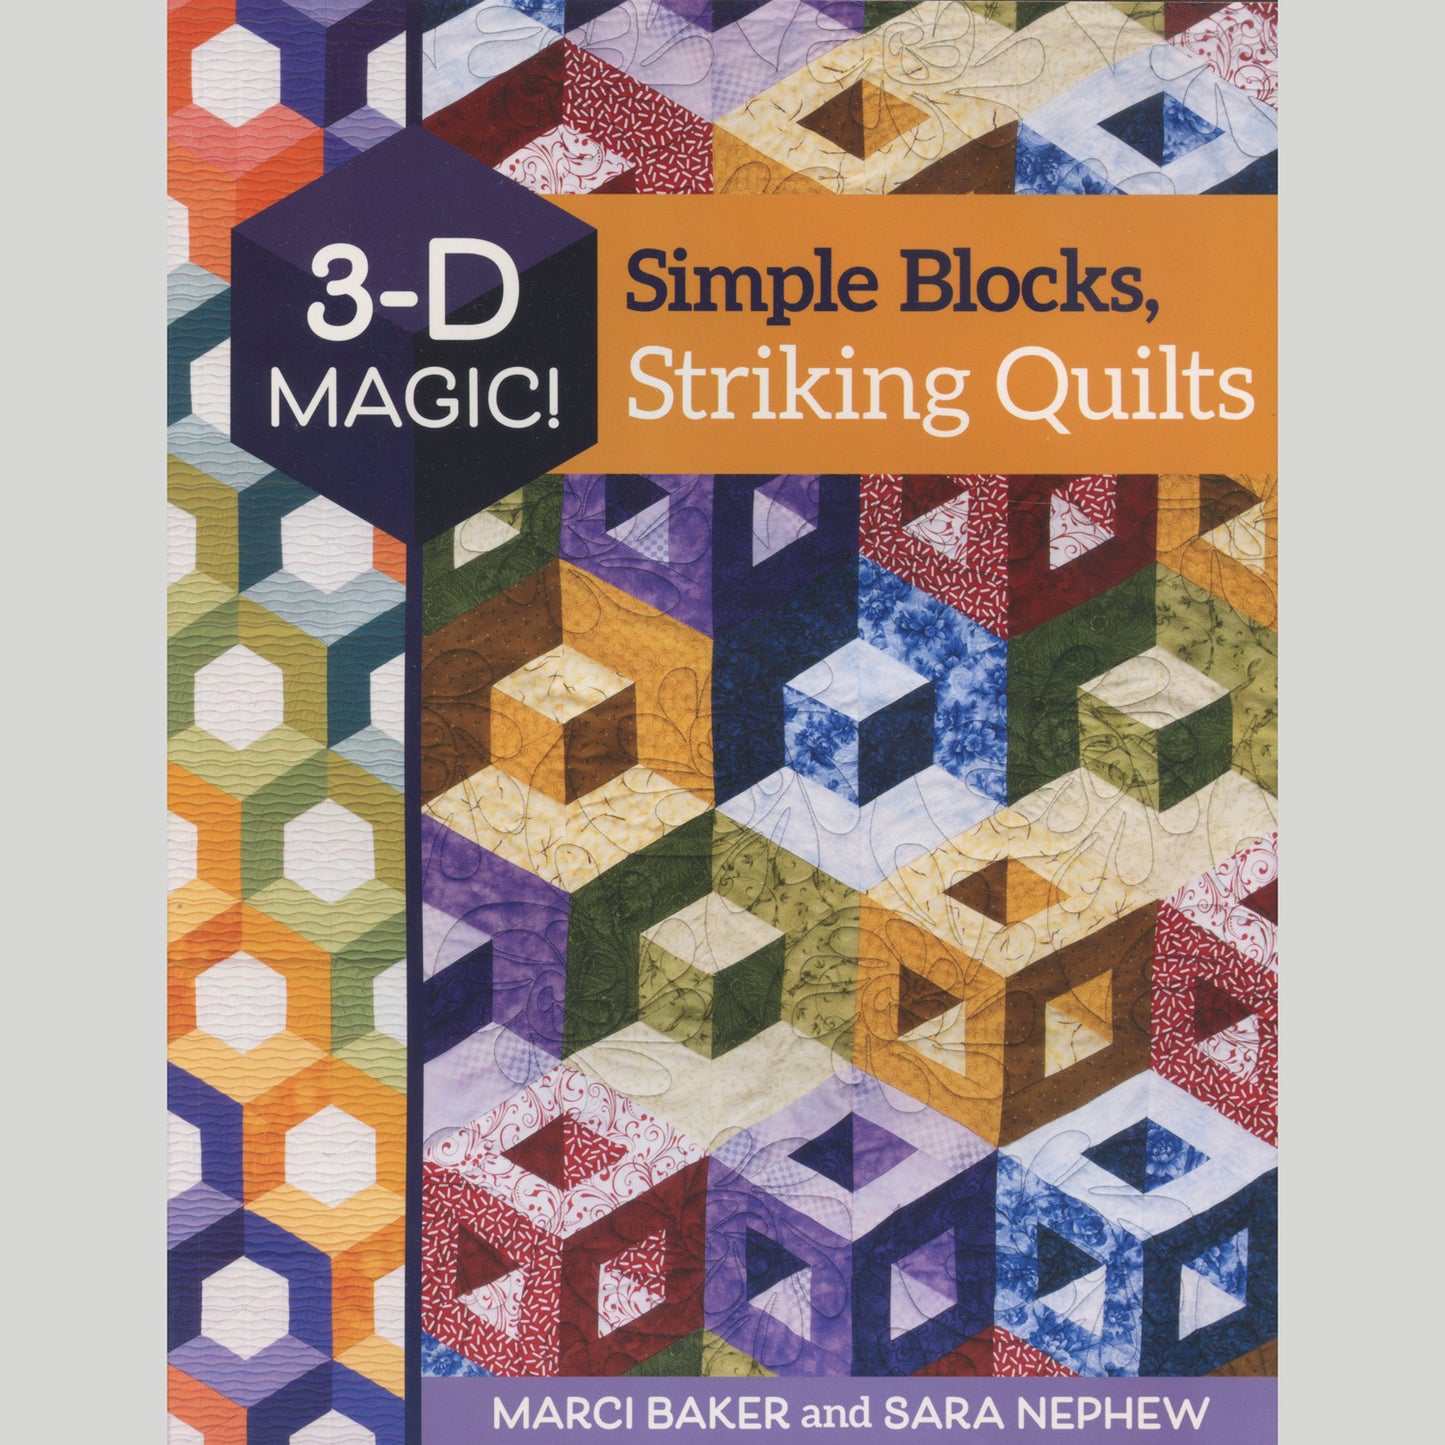 3-D Magic! Simple Blocks, Striking Quilts Book Primary Image